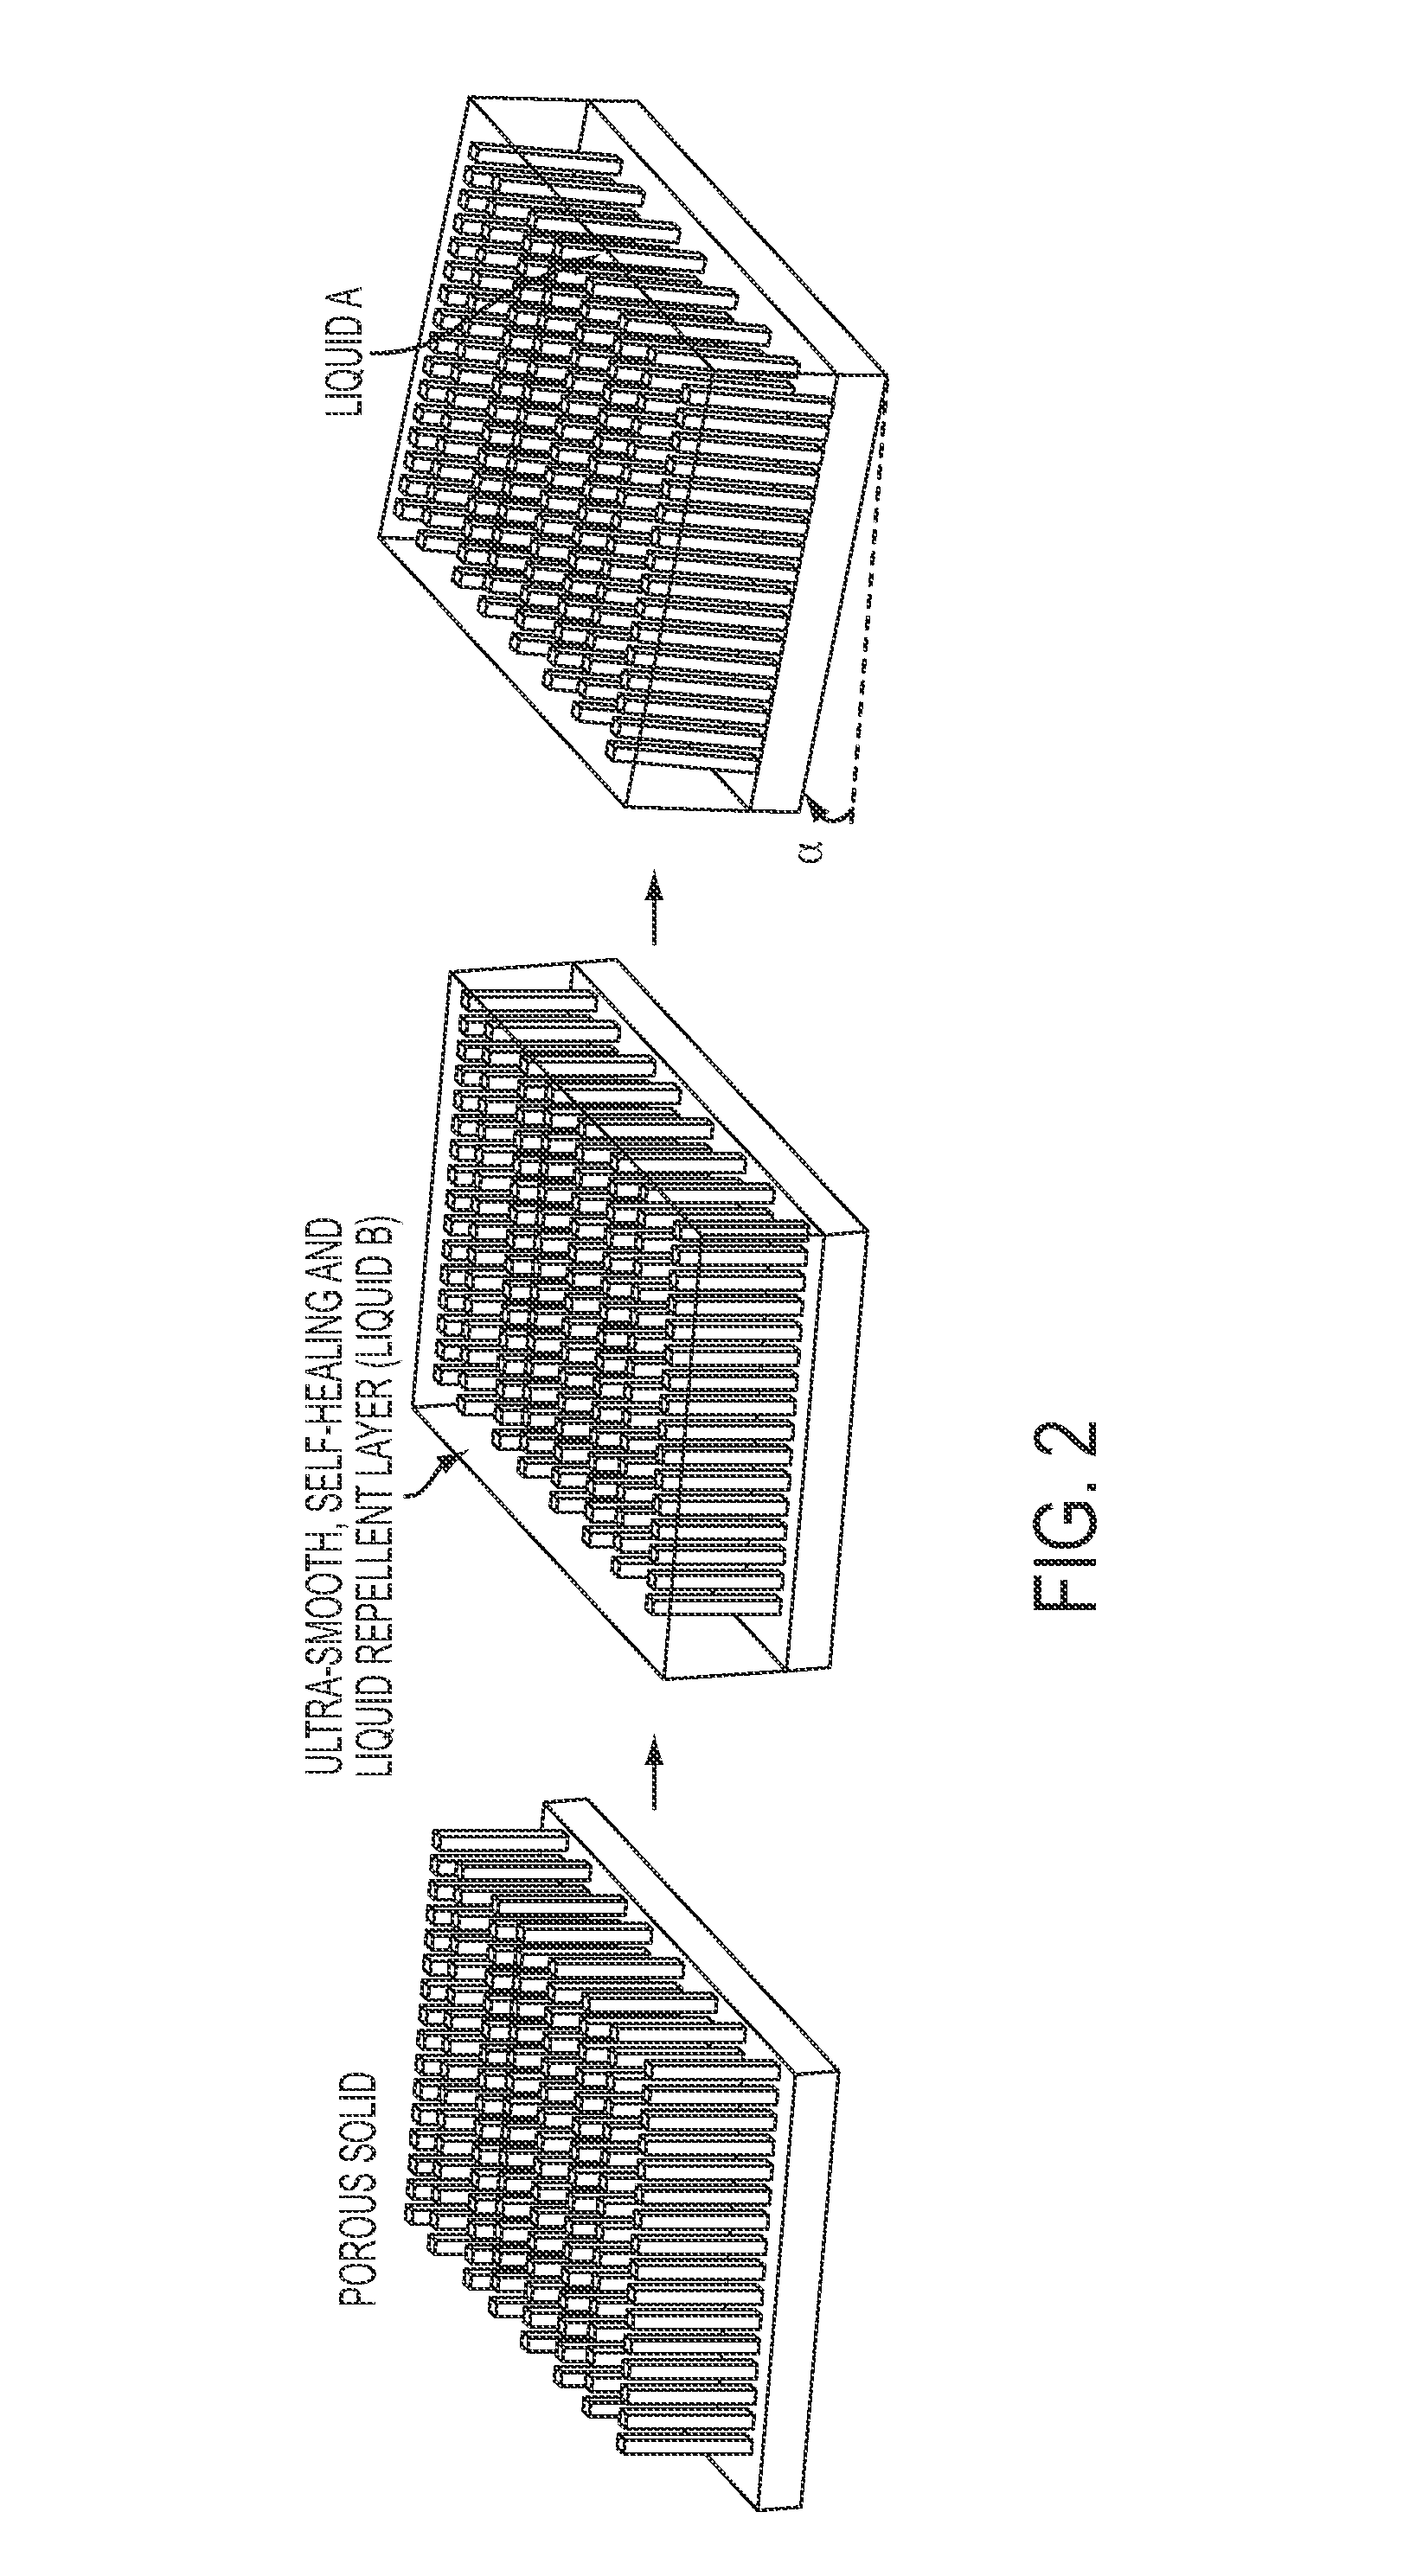 Slippery liquid-infused porous surfaces and biological applications thereof